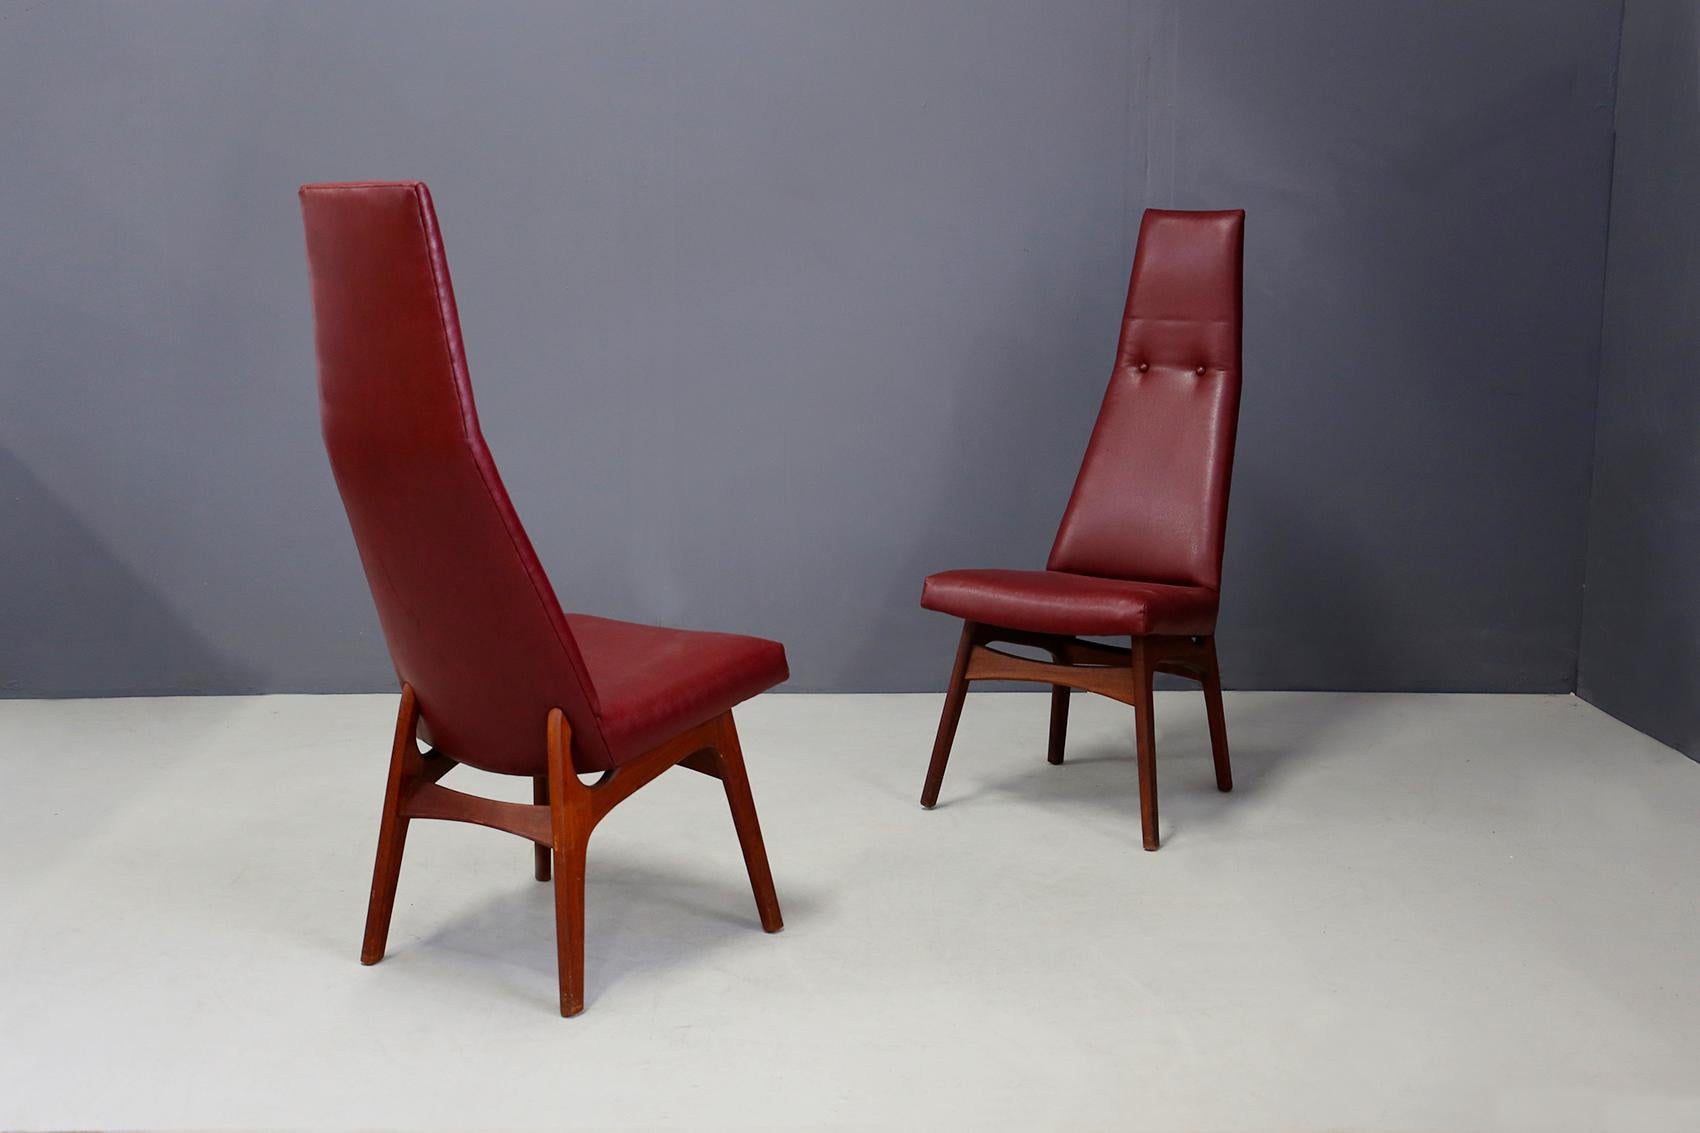 Rare set of pair of dining chairs by Adrian Pearsall for Craft Associates. The pair has been restored but still retains its original period fabric. Its upholstery is in burgundy leather in perfect condition. The pair of chairs is from circa 1950.